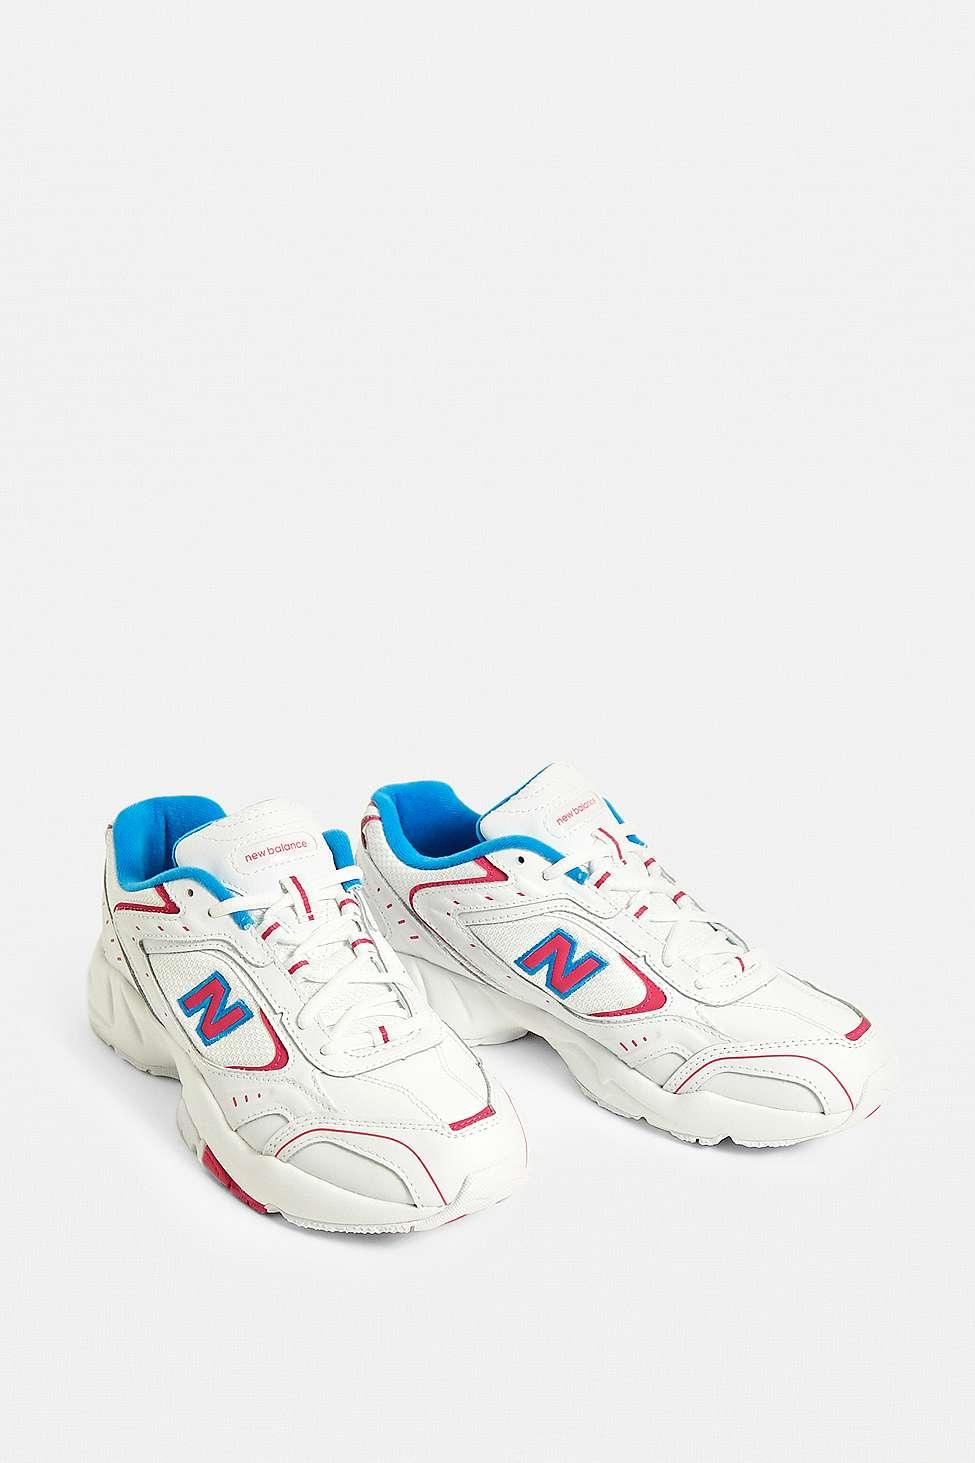 New Balance Leather 452 White & Blue Trainers - Lyst